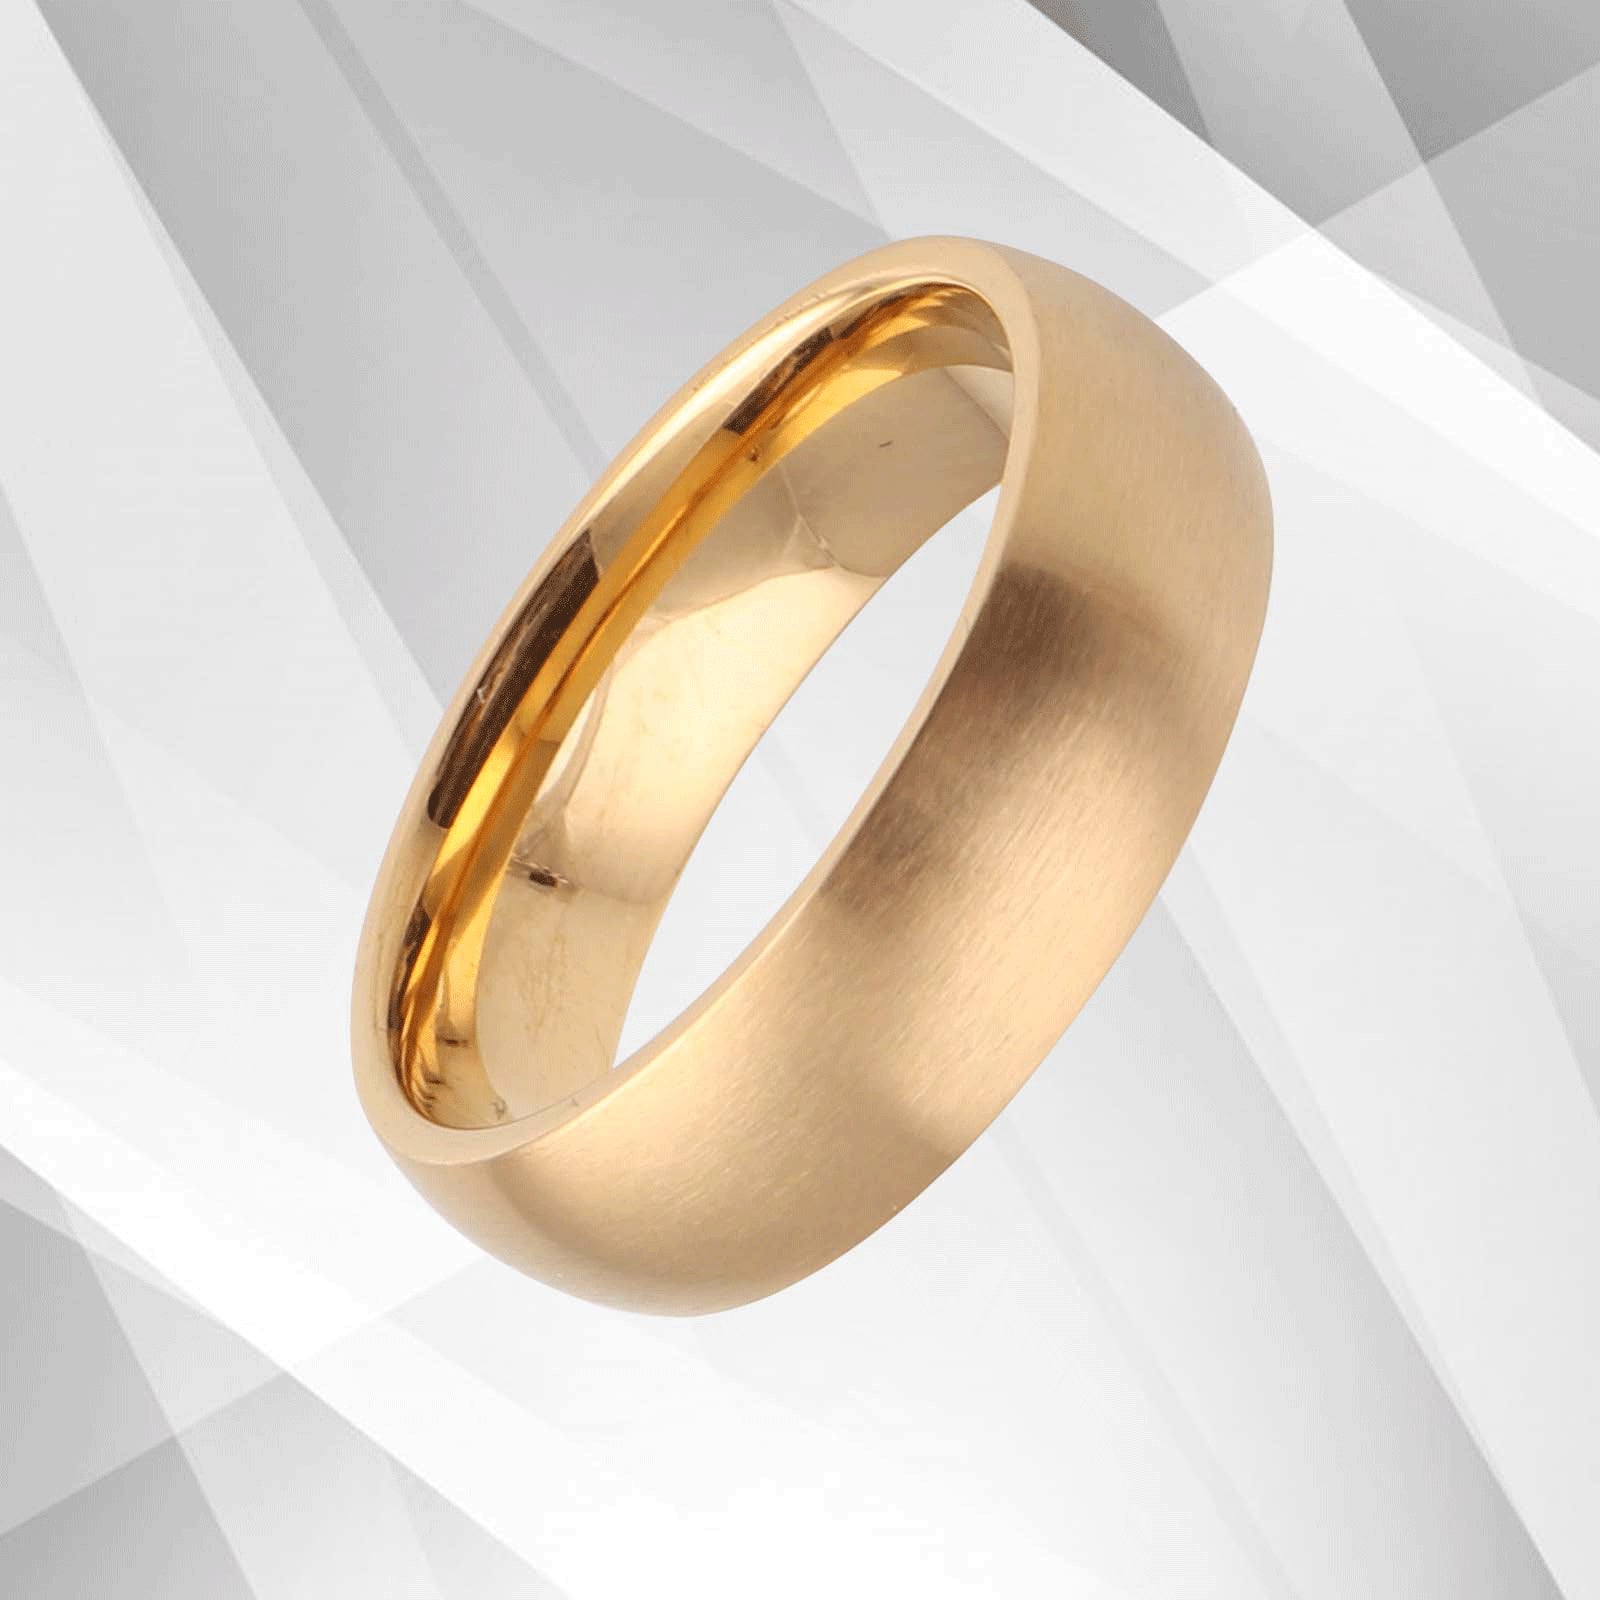 Contemporary Men's Titanium Wedding Band Ring - 18Ct Yellow Gold Plated, 7mm Wide D-Shape Comfort Fit, Handmade Bijou Her